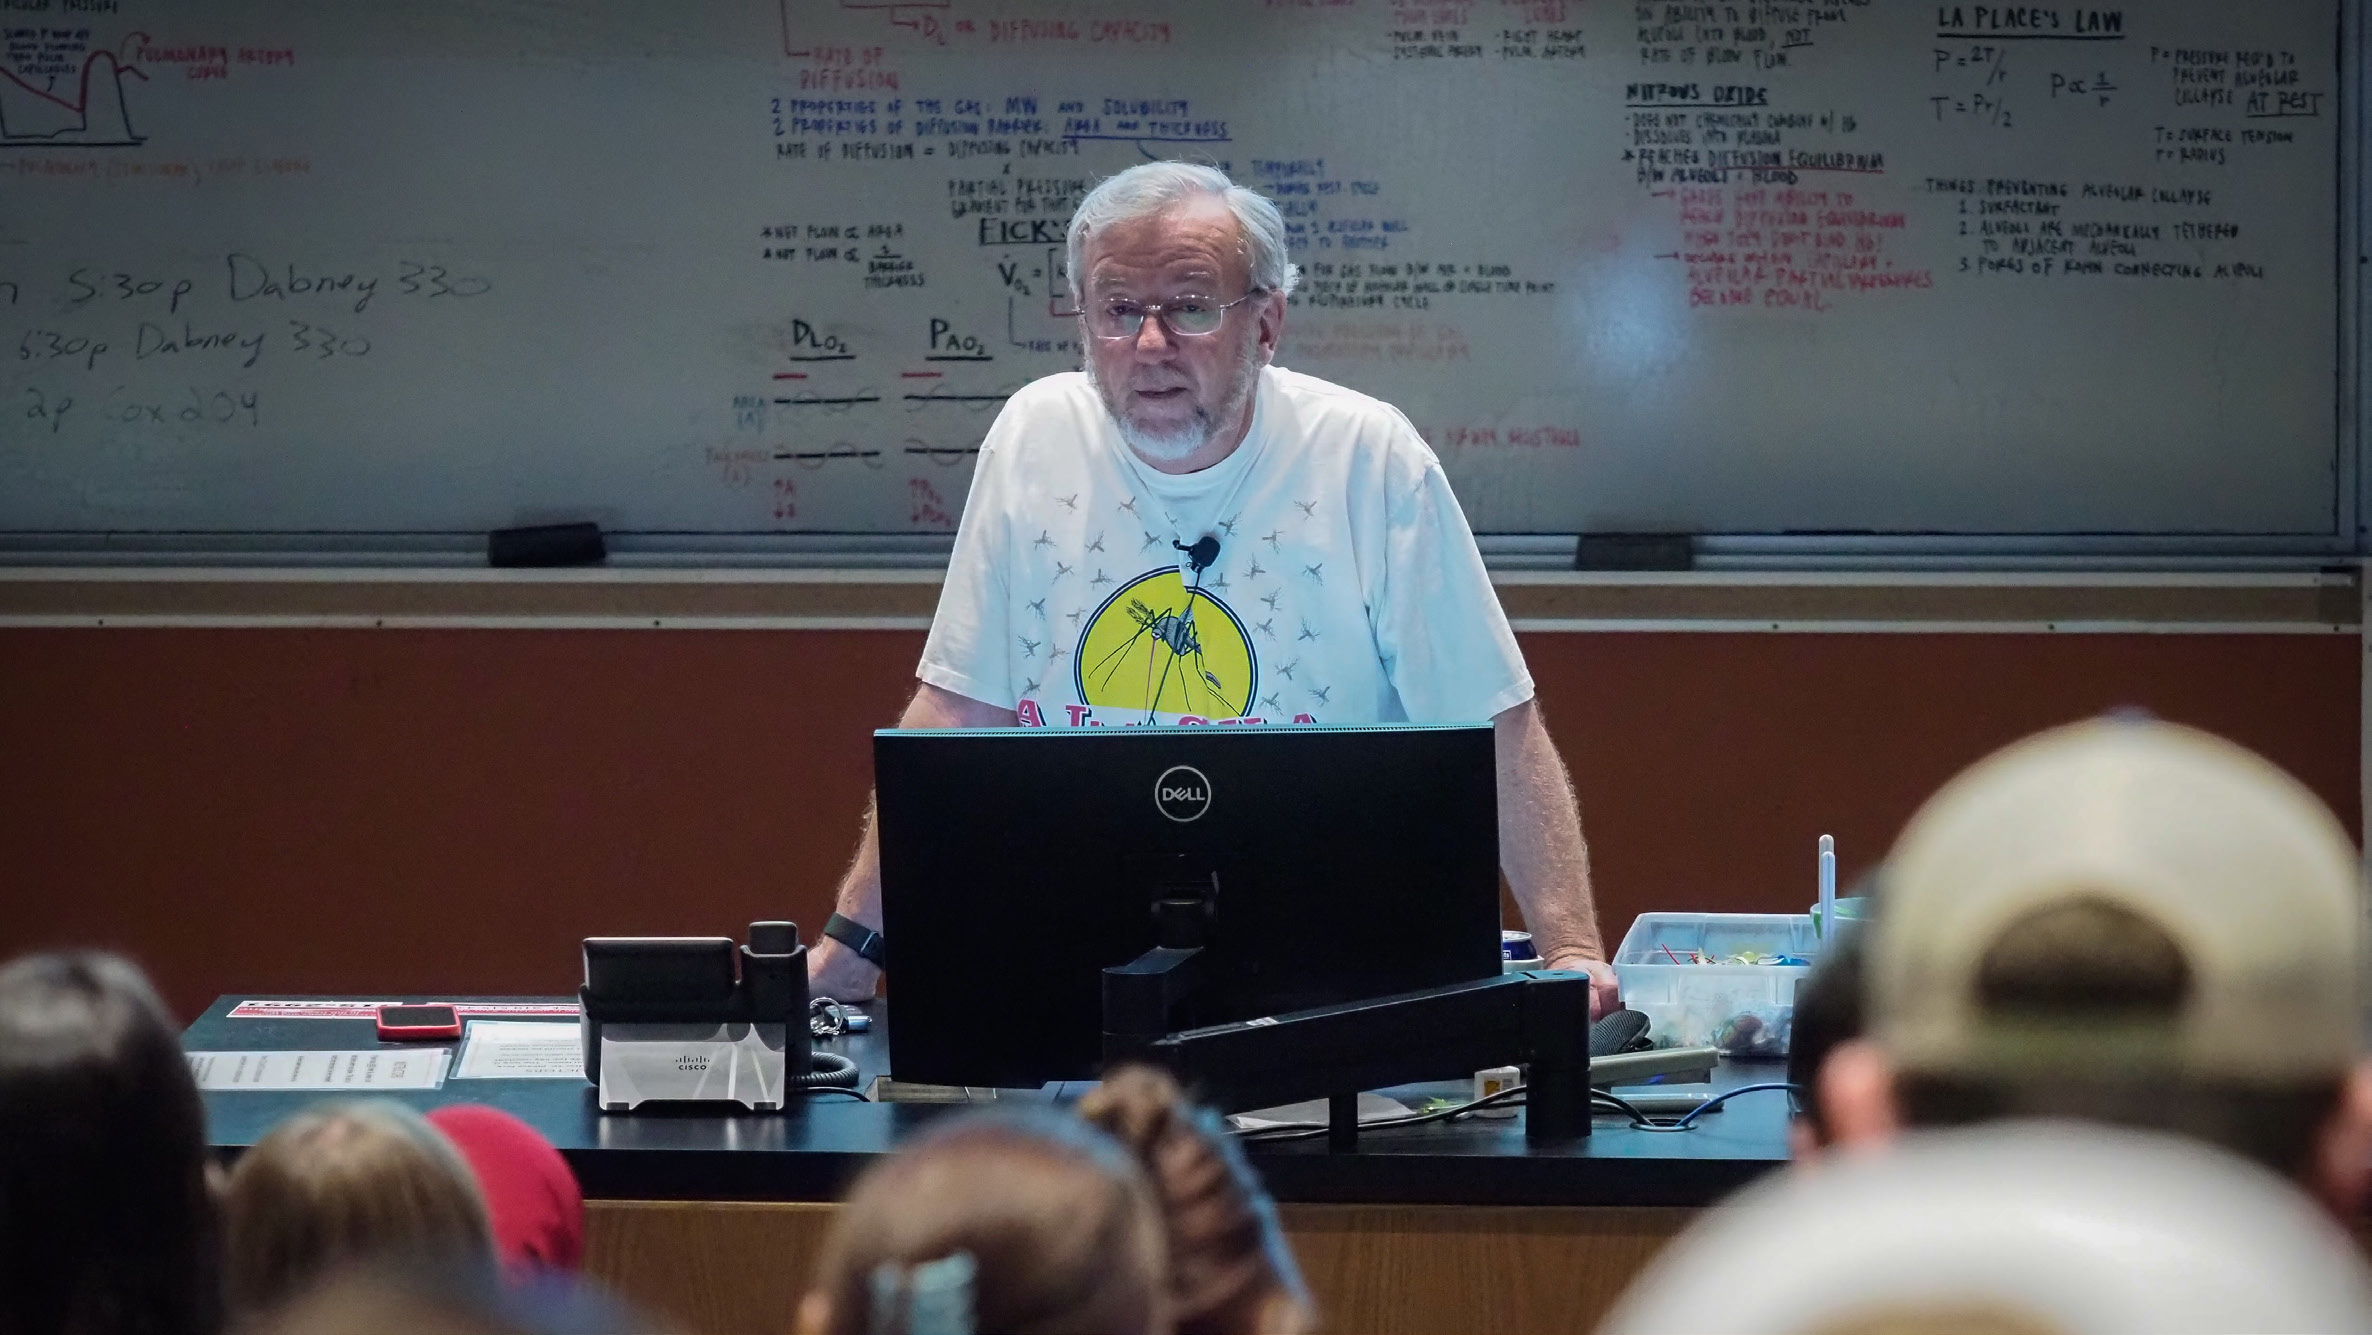 Clyde Sorenson stands behind a computer screen at the front of the class